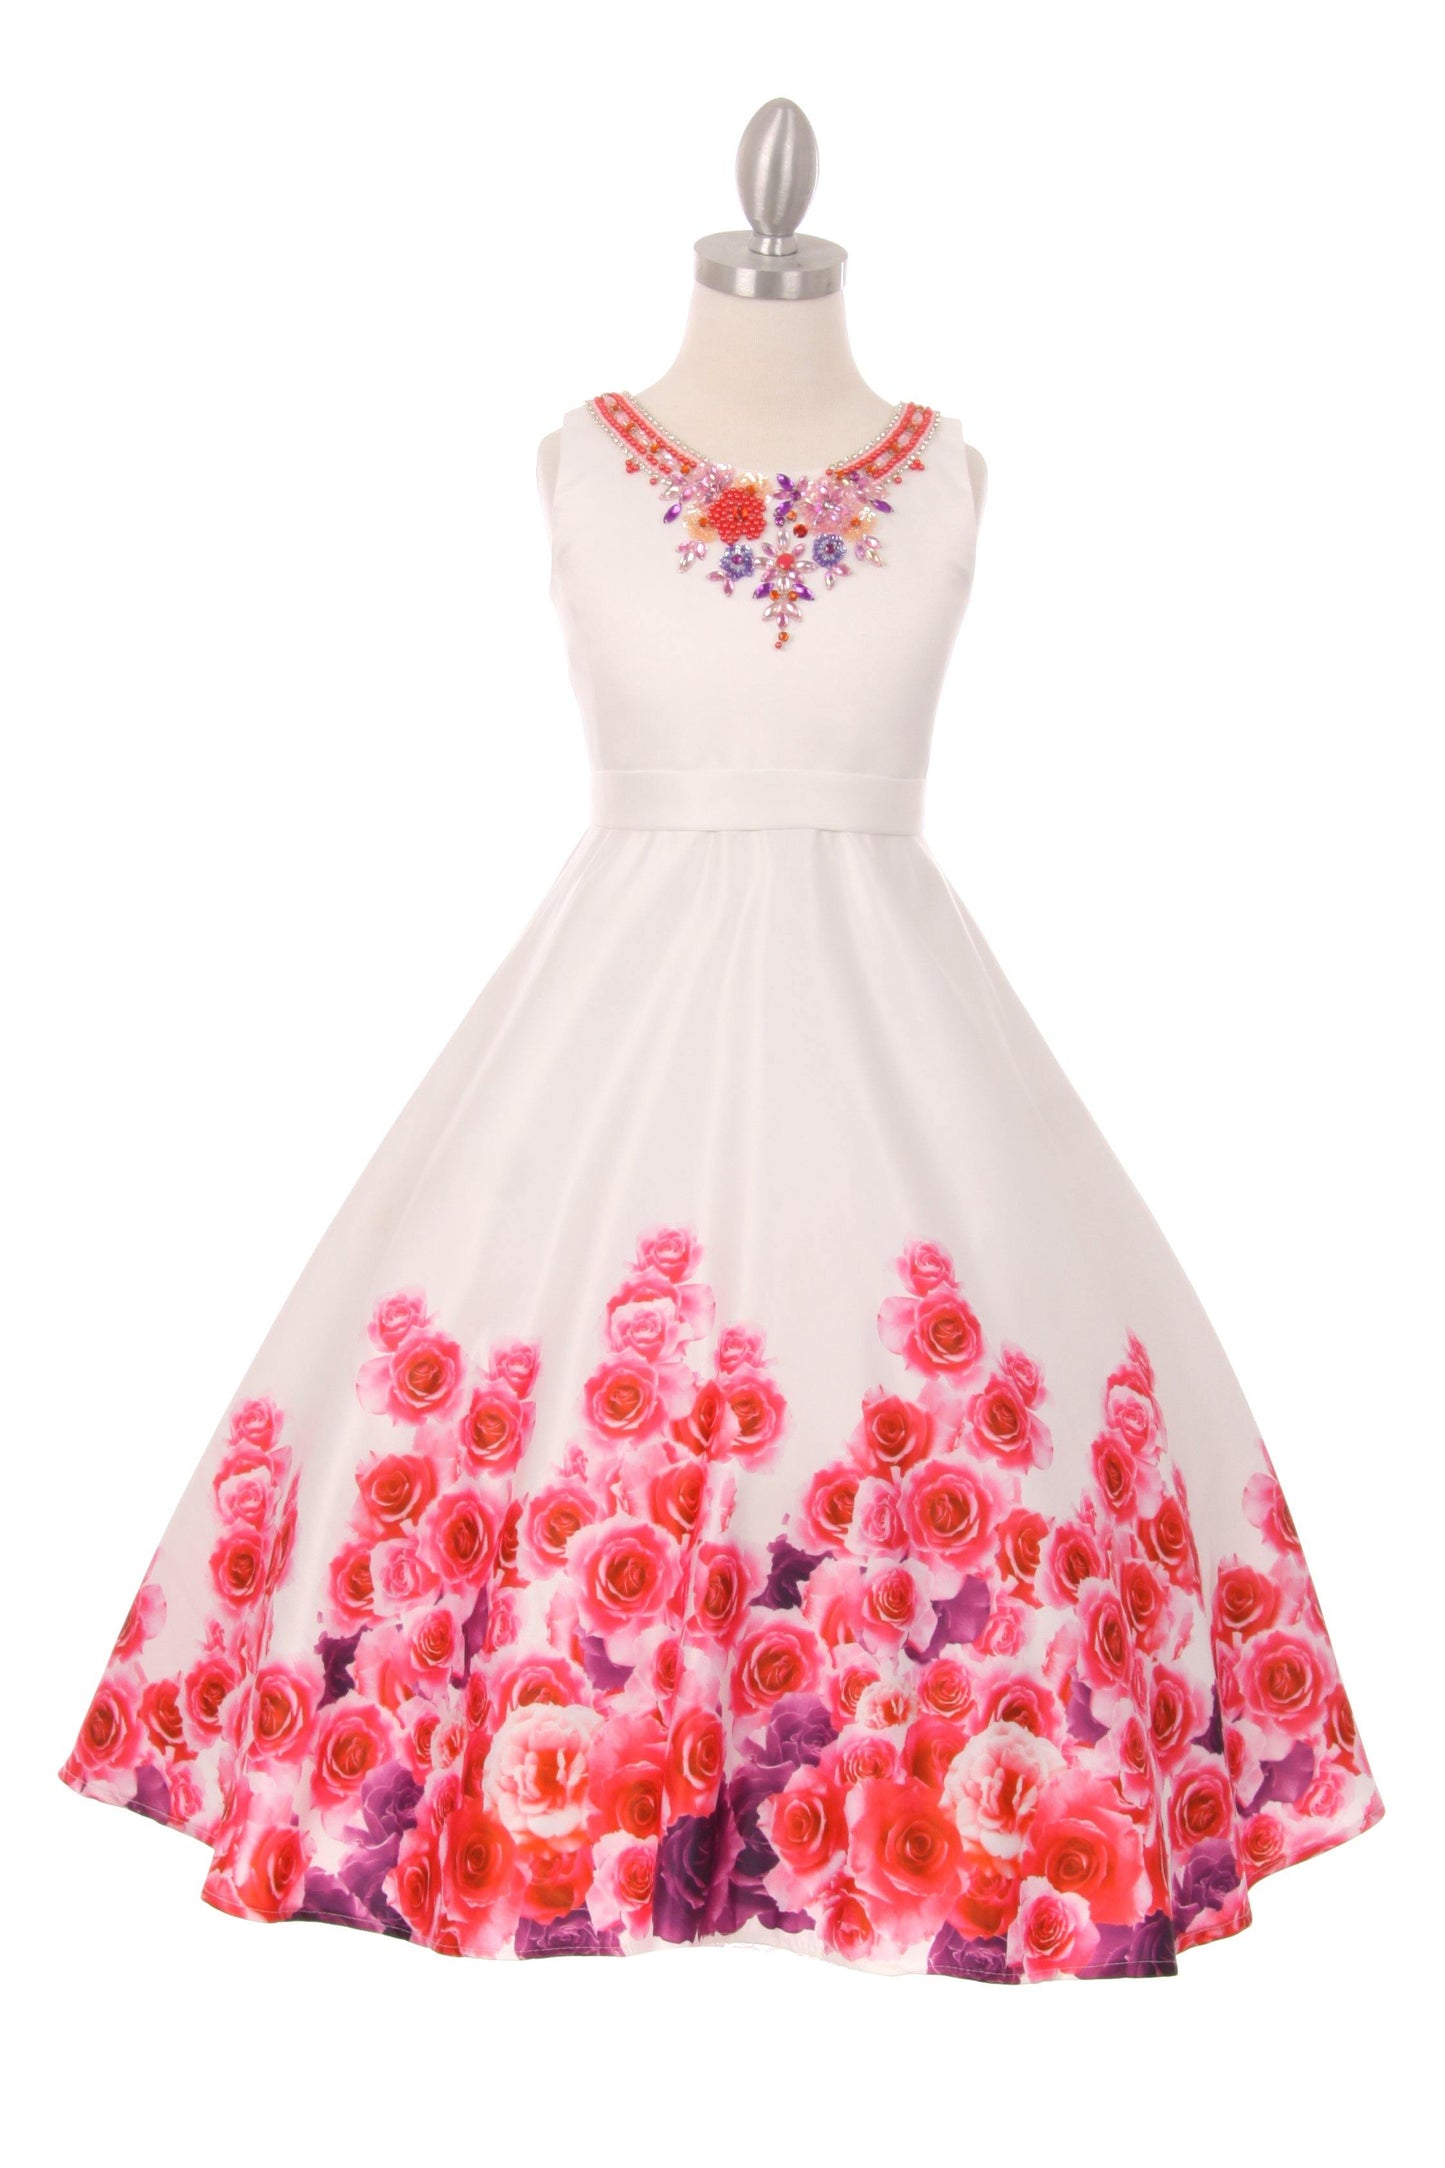 Sleeveless Rose Print Dress with Embellished Neckline Flower Girl - The Dress Outlet Cinderella Couture